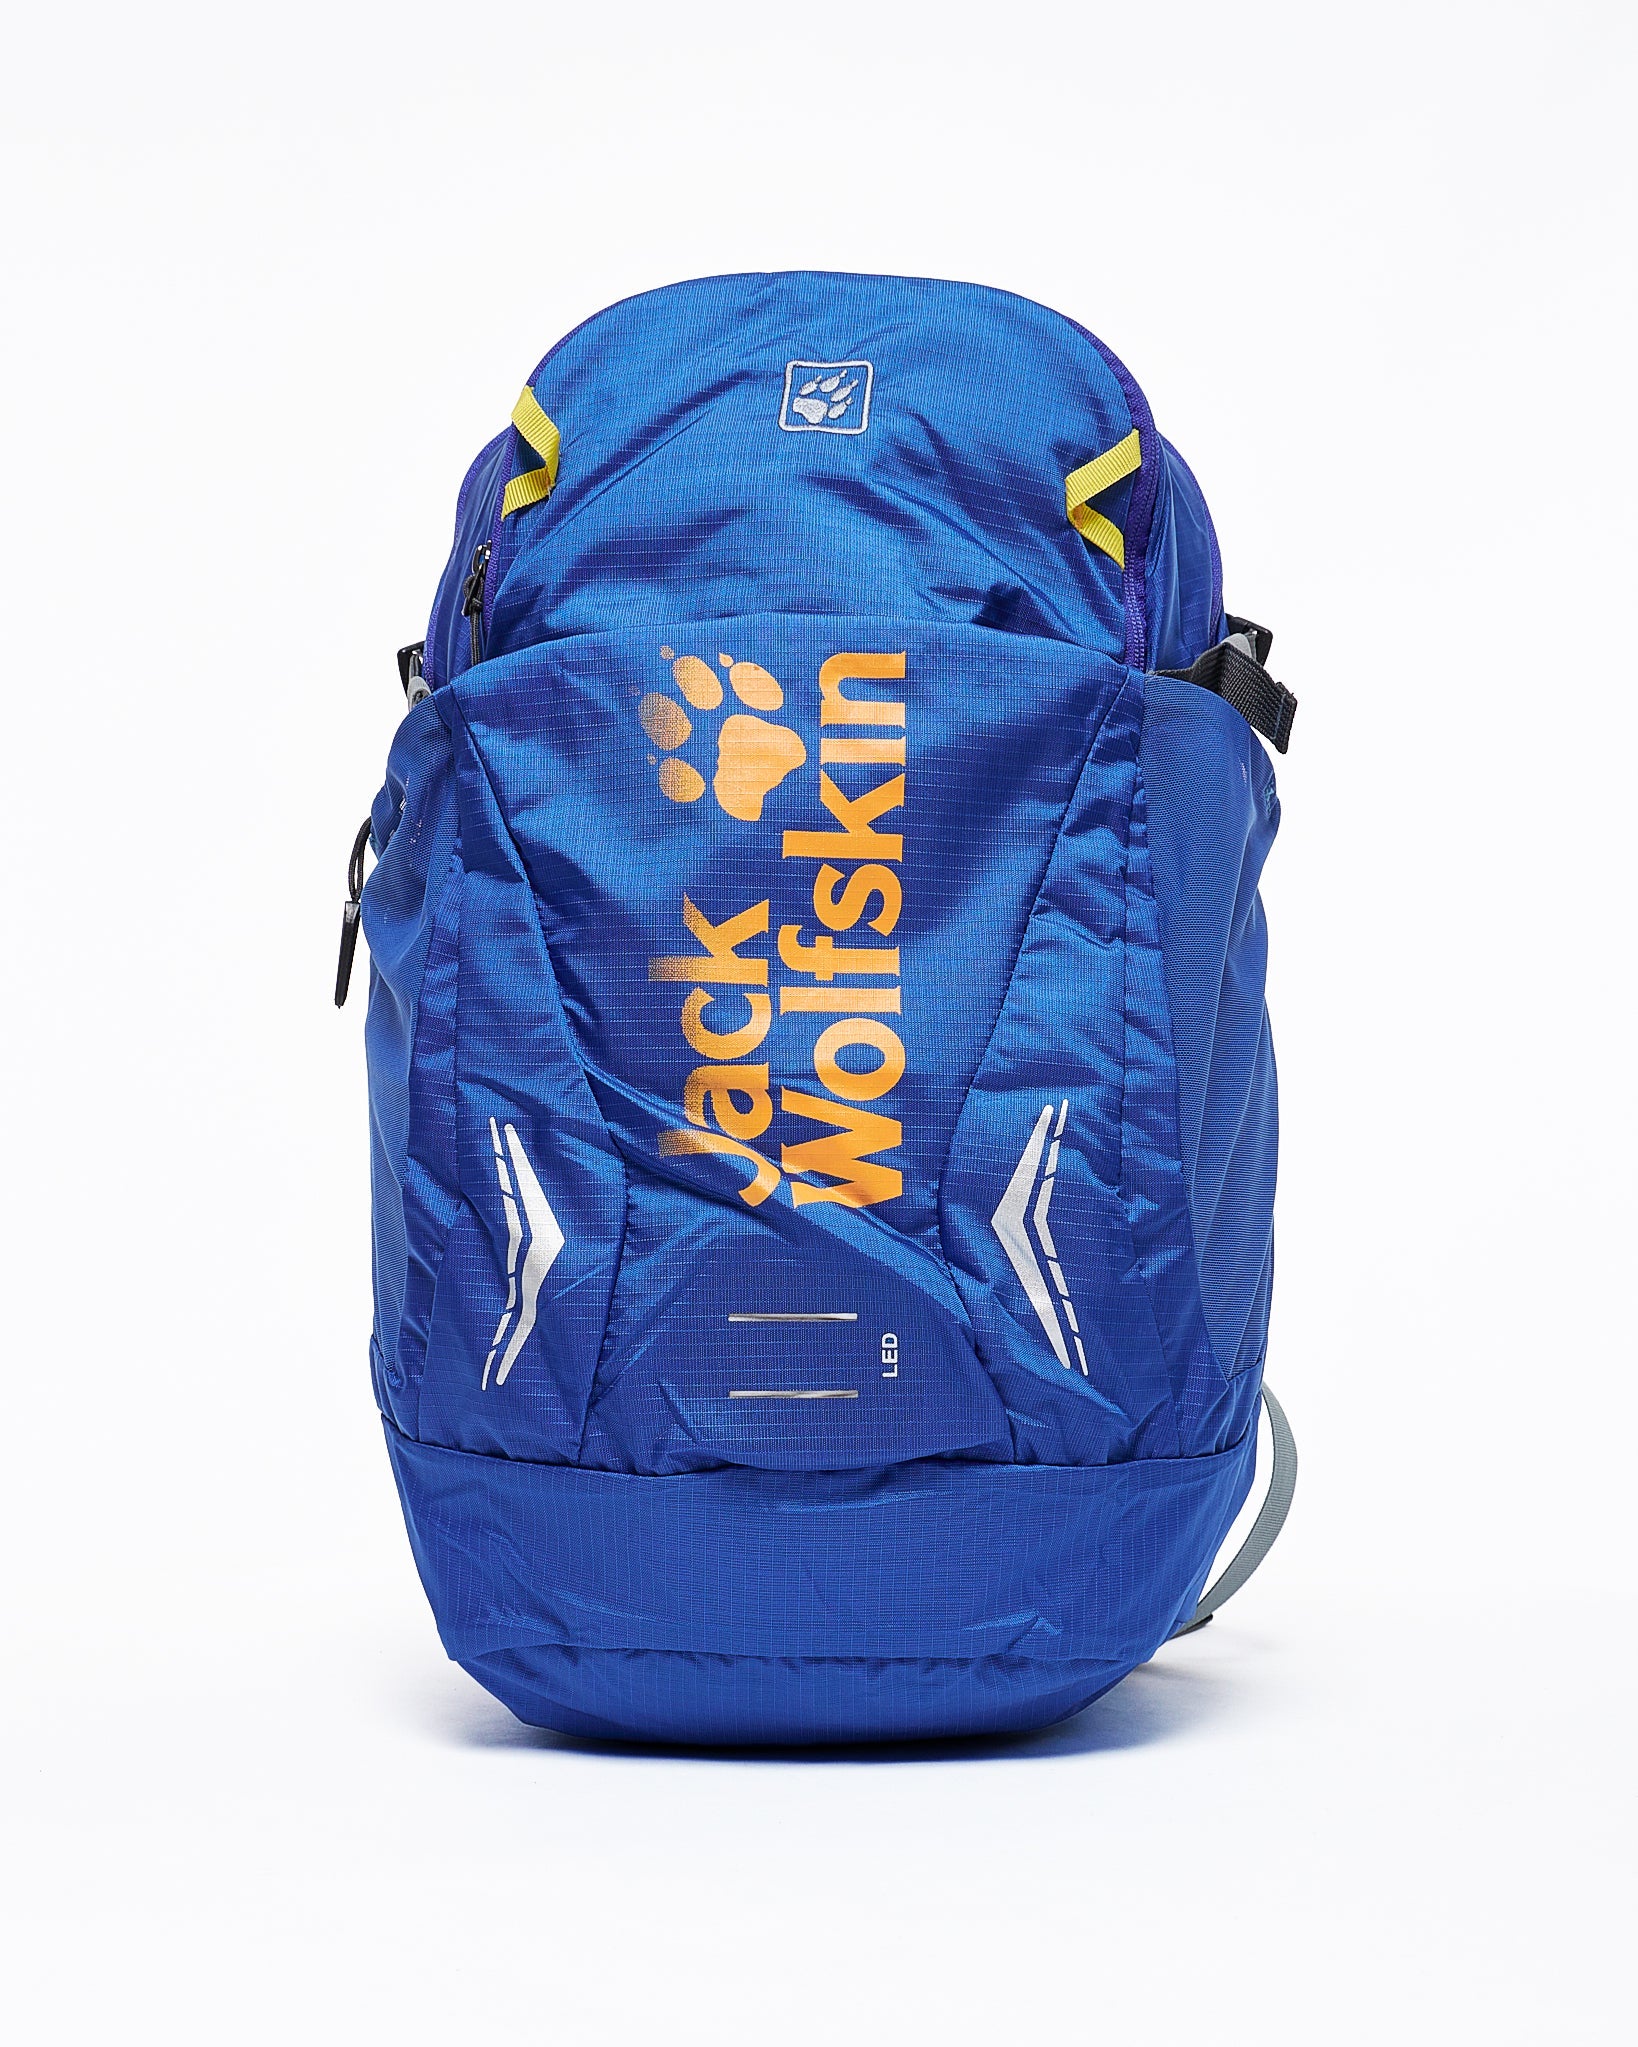 MOI OUTFIT-Hiking Backpack 45.90